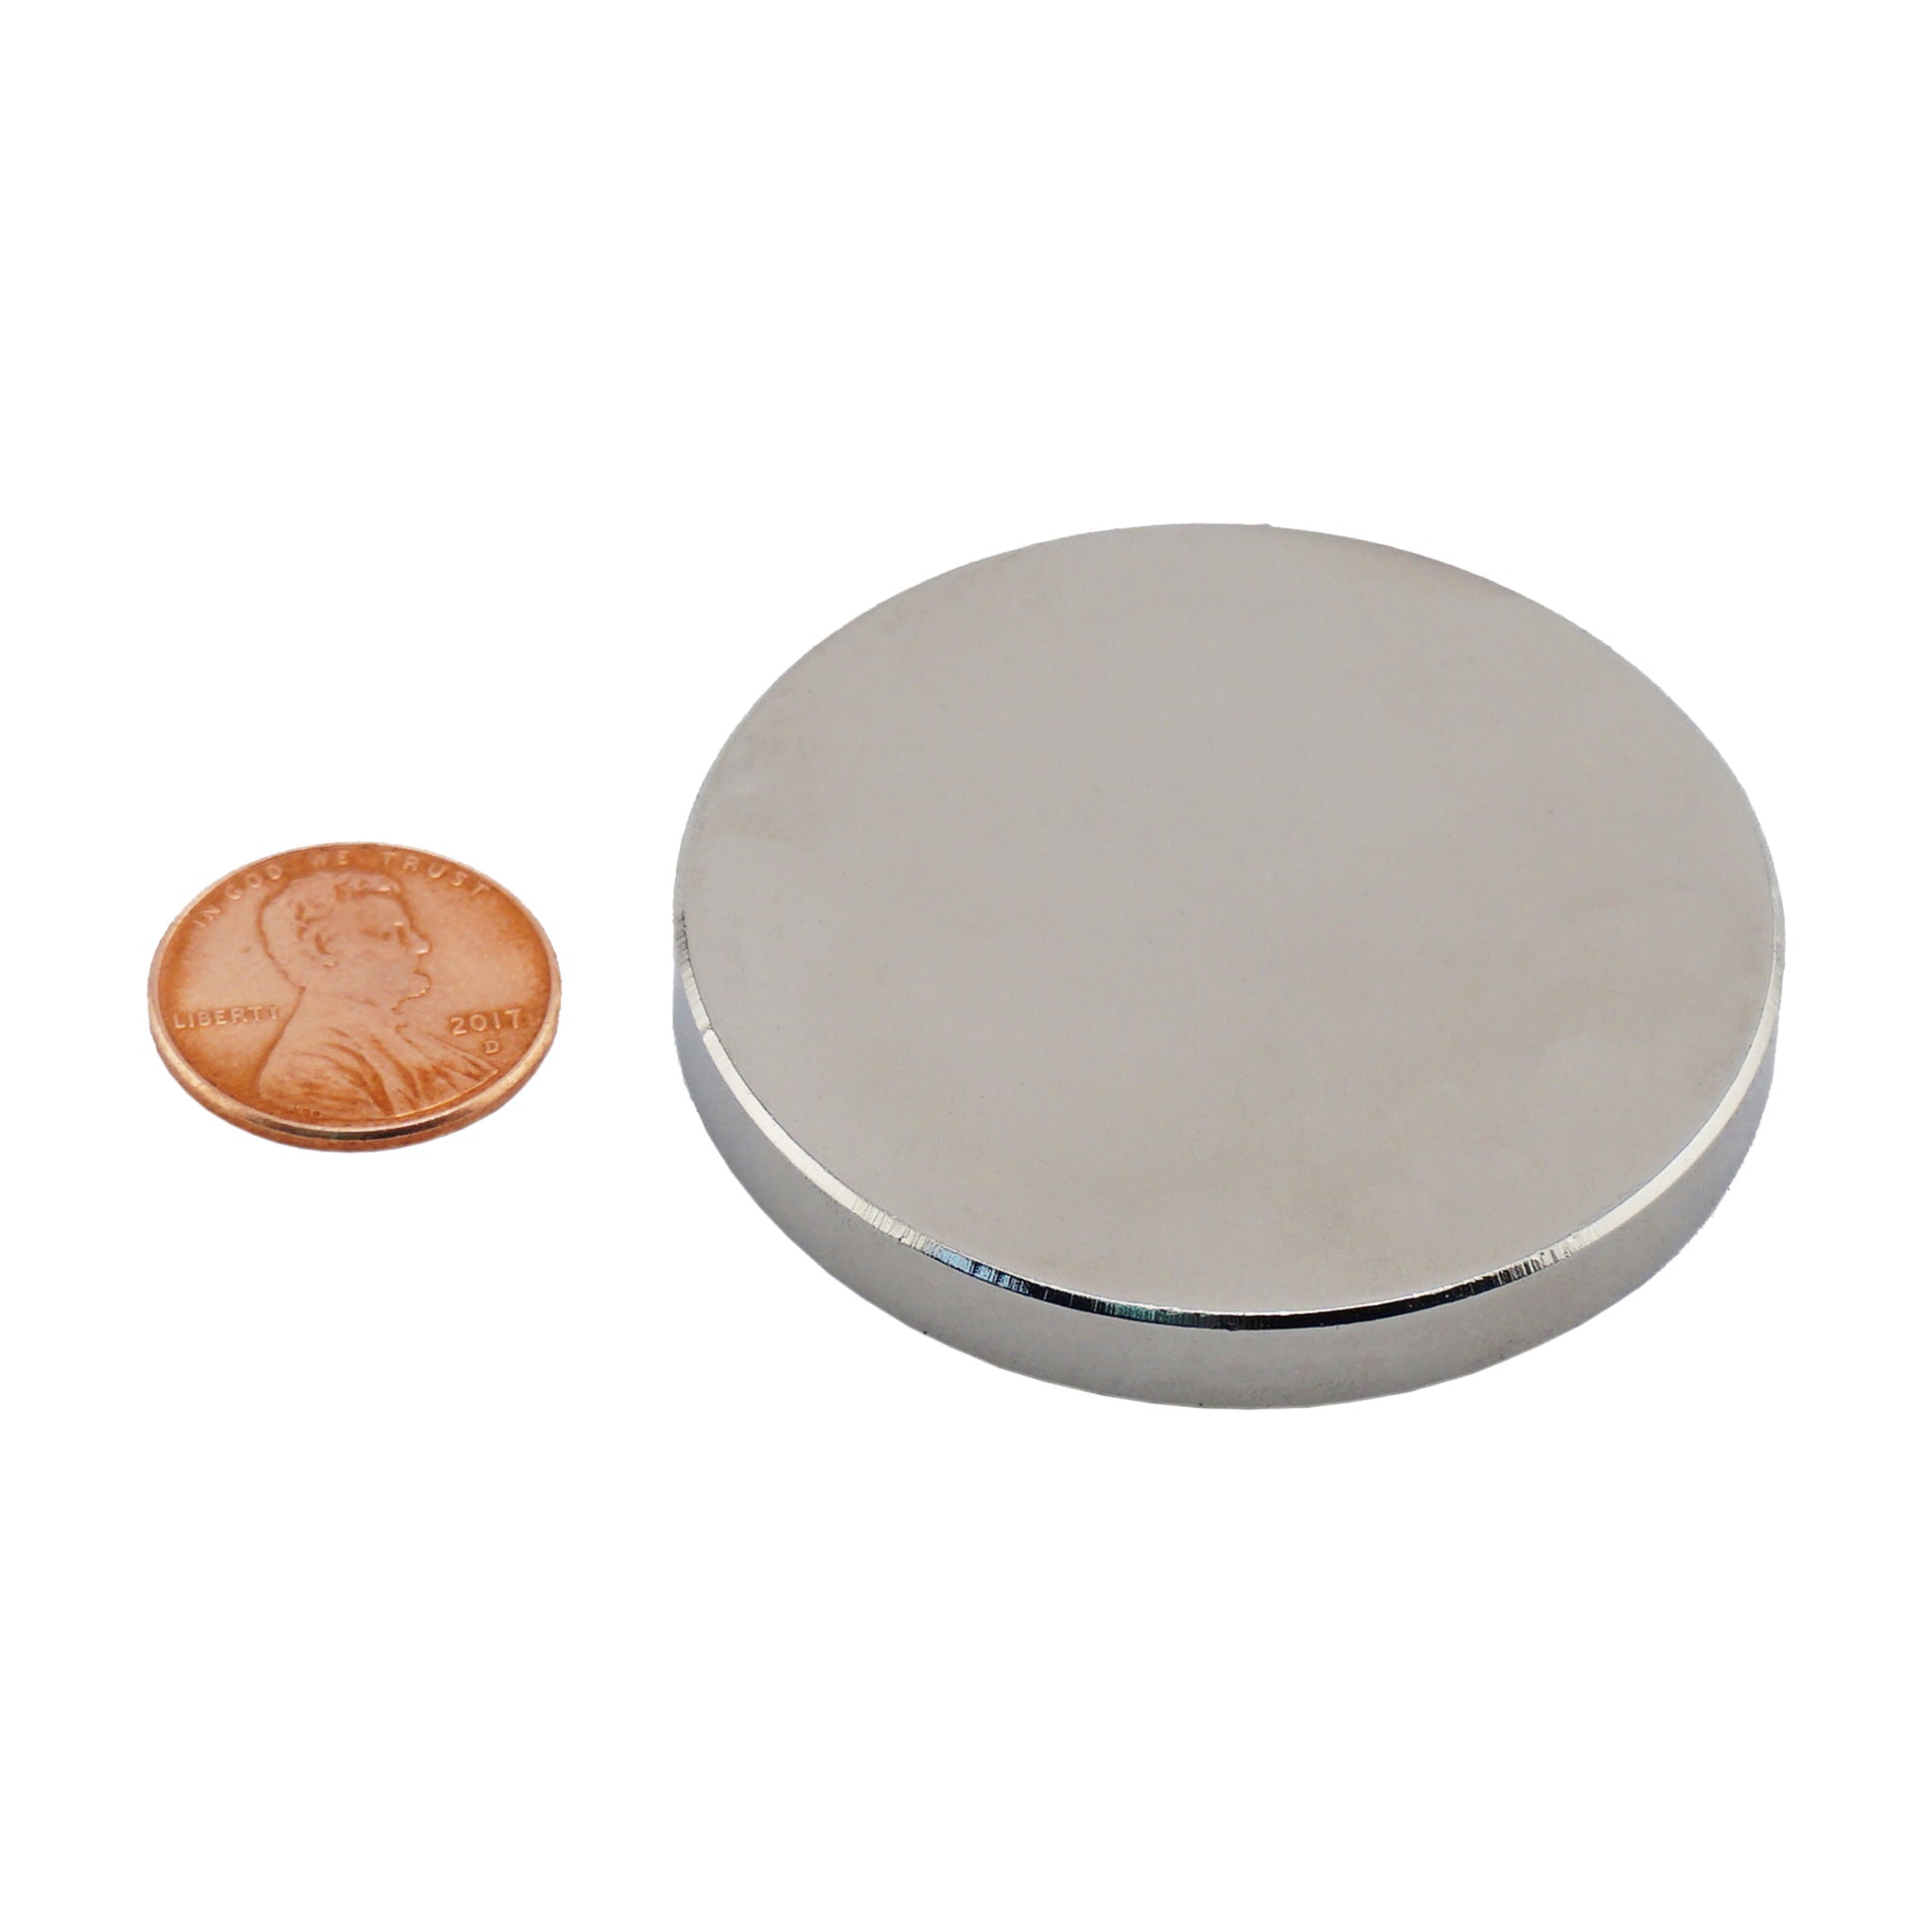 Load image into Gallery viewer, ND020007N Neodymium Disc Magnet - Compared to Penny for Size Reference